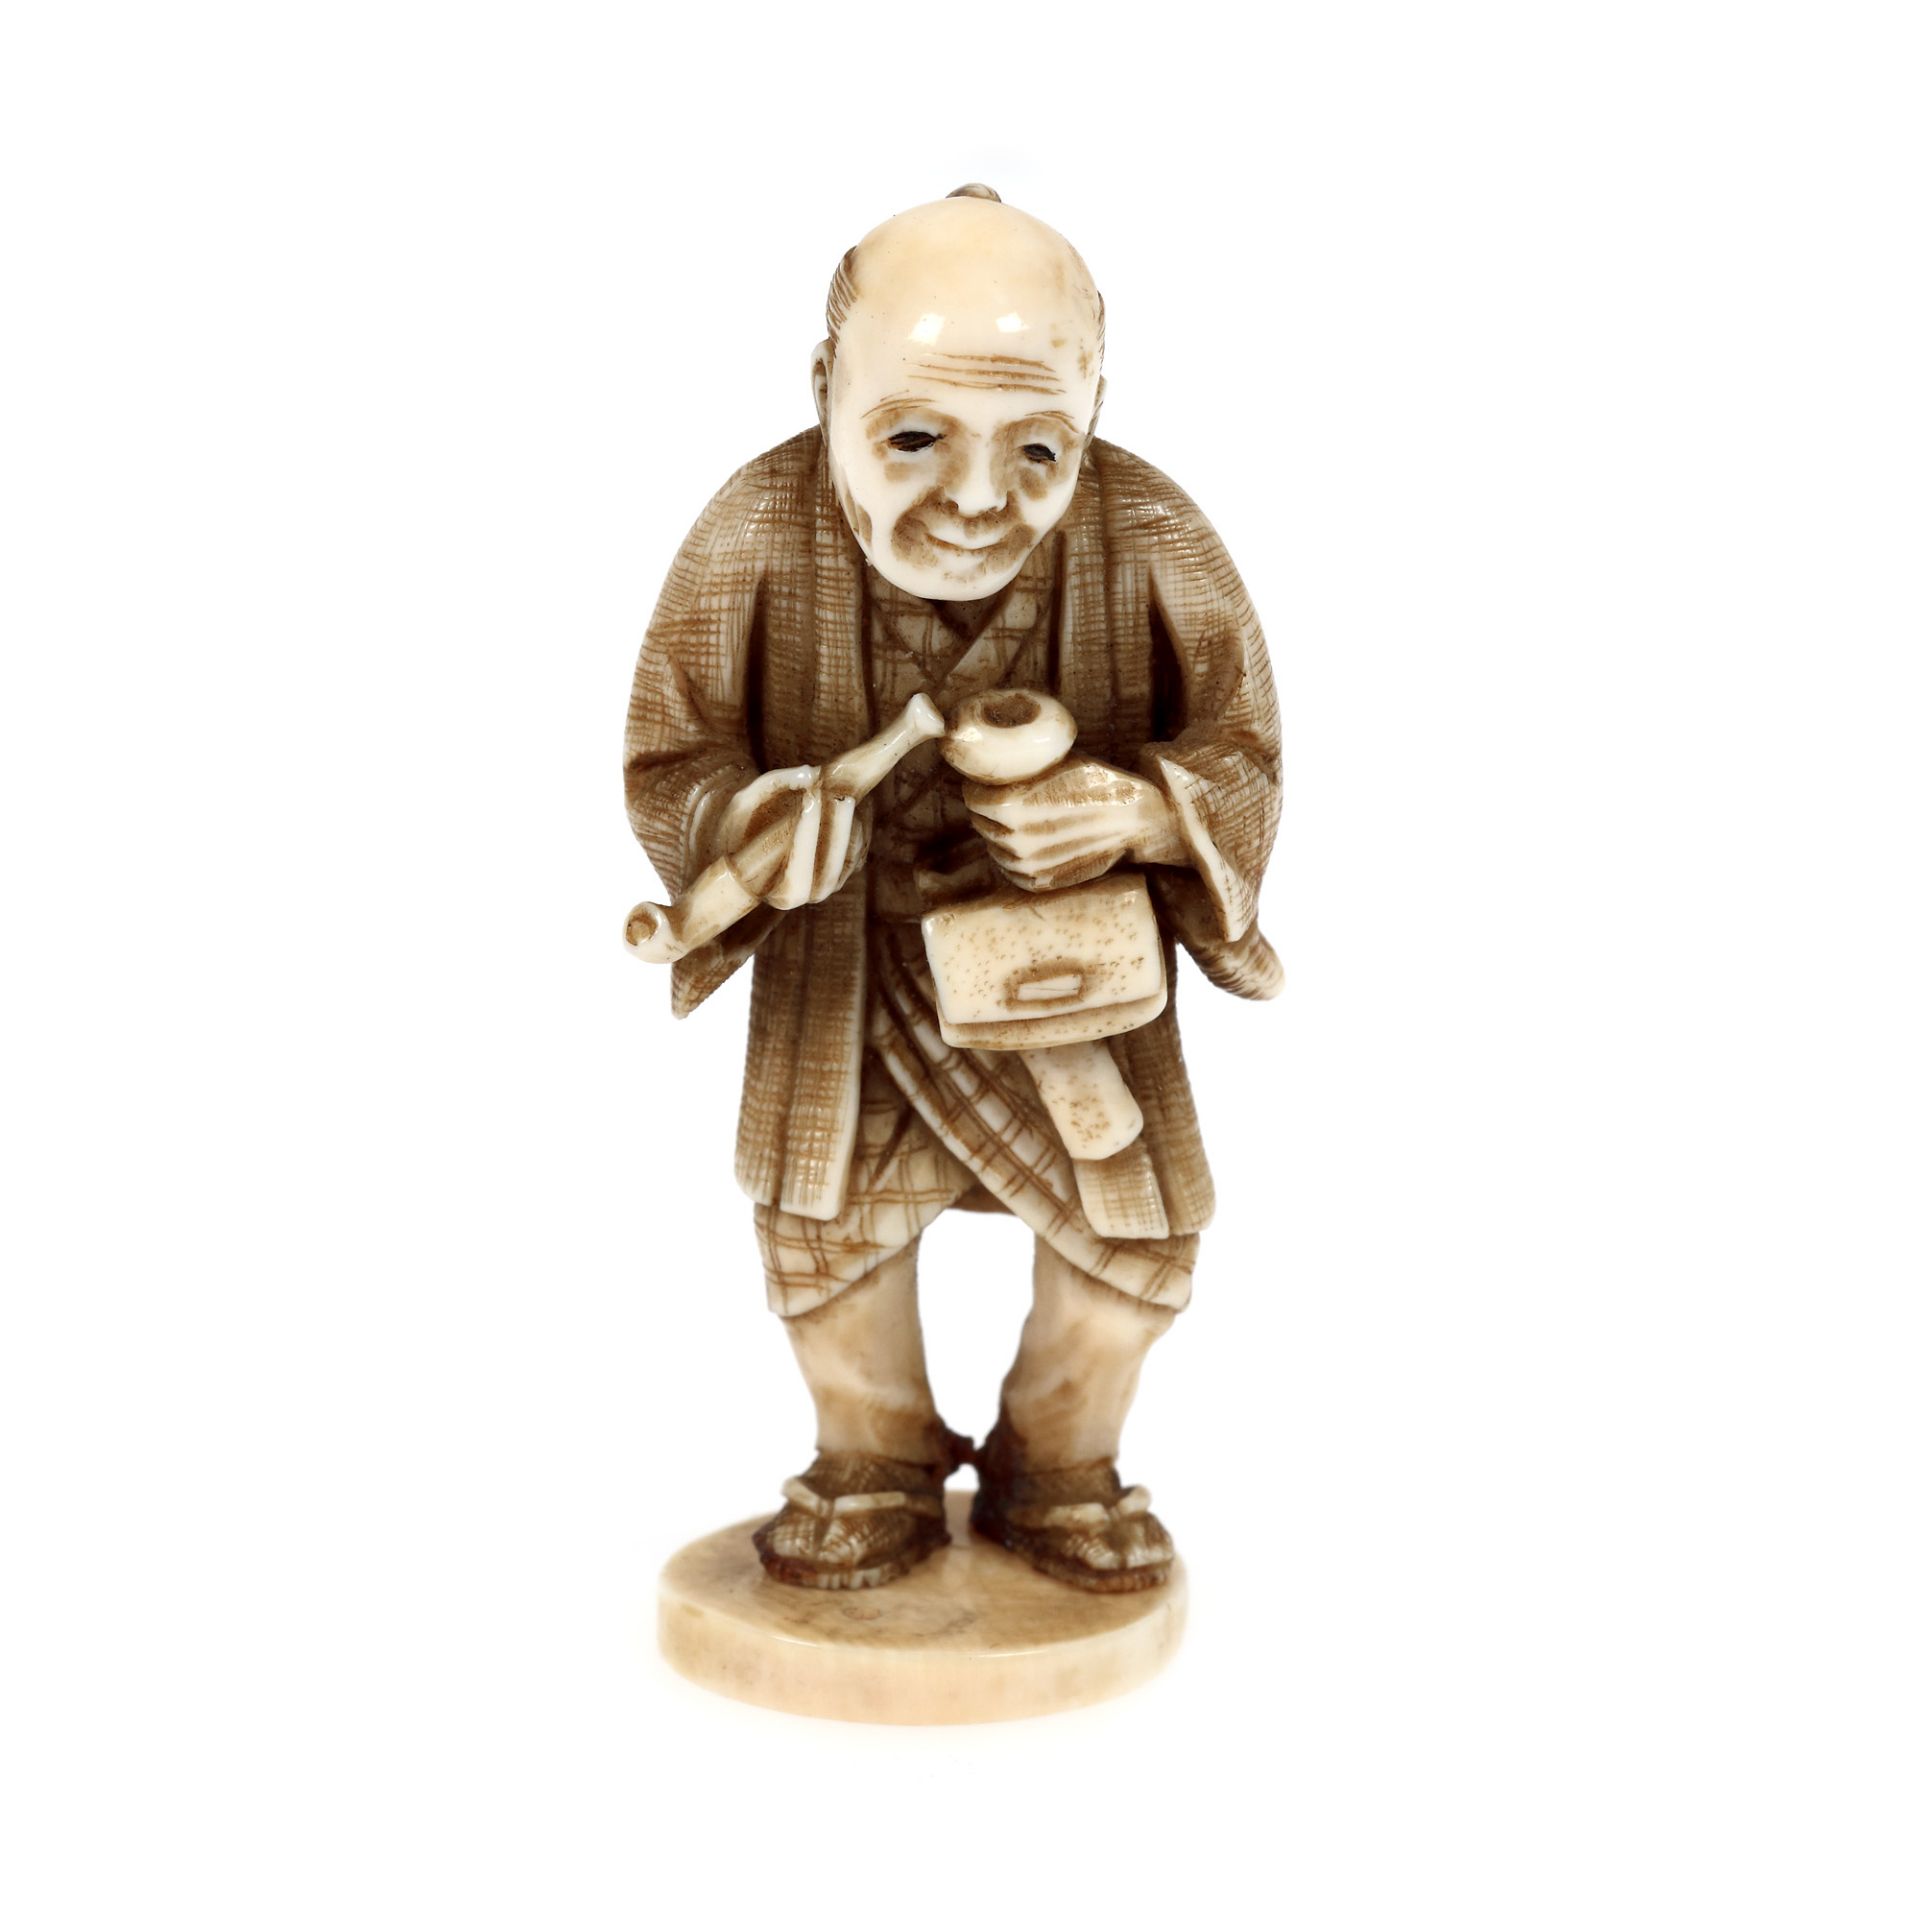 Ivory Netsuke, depicting an old man preparing his pipe, signed, Japan, late 19th century